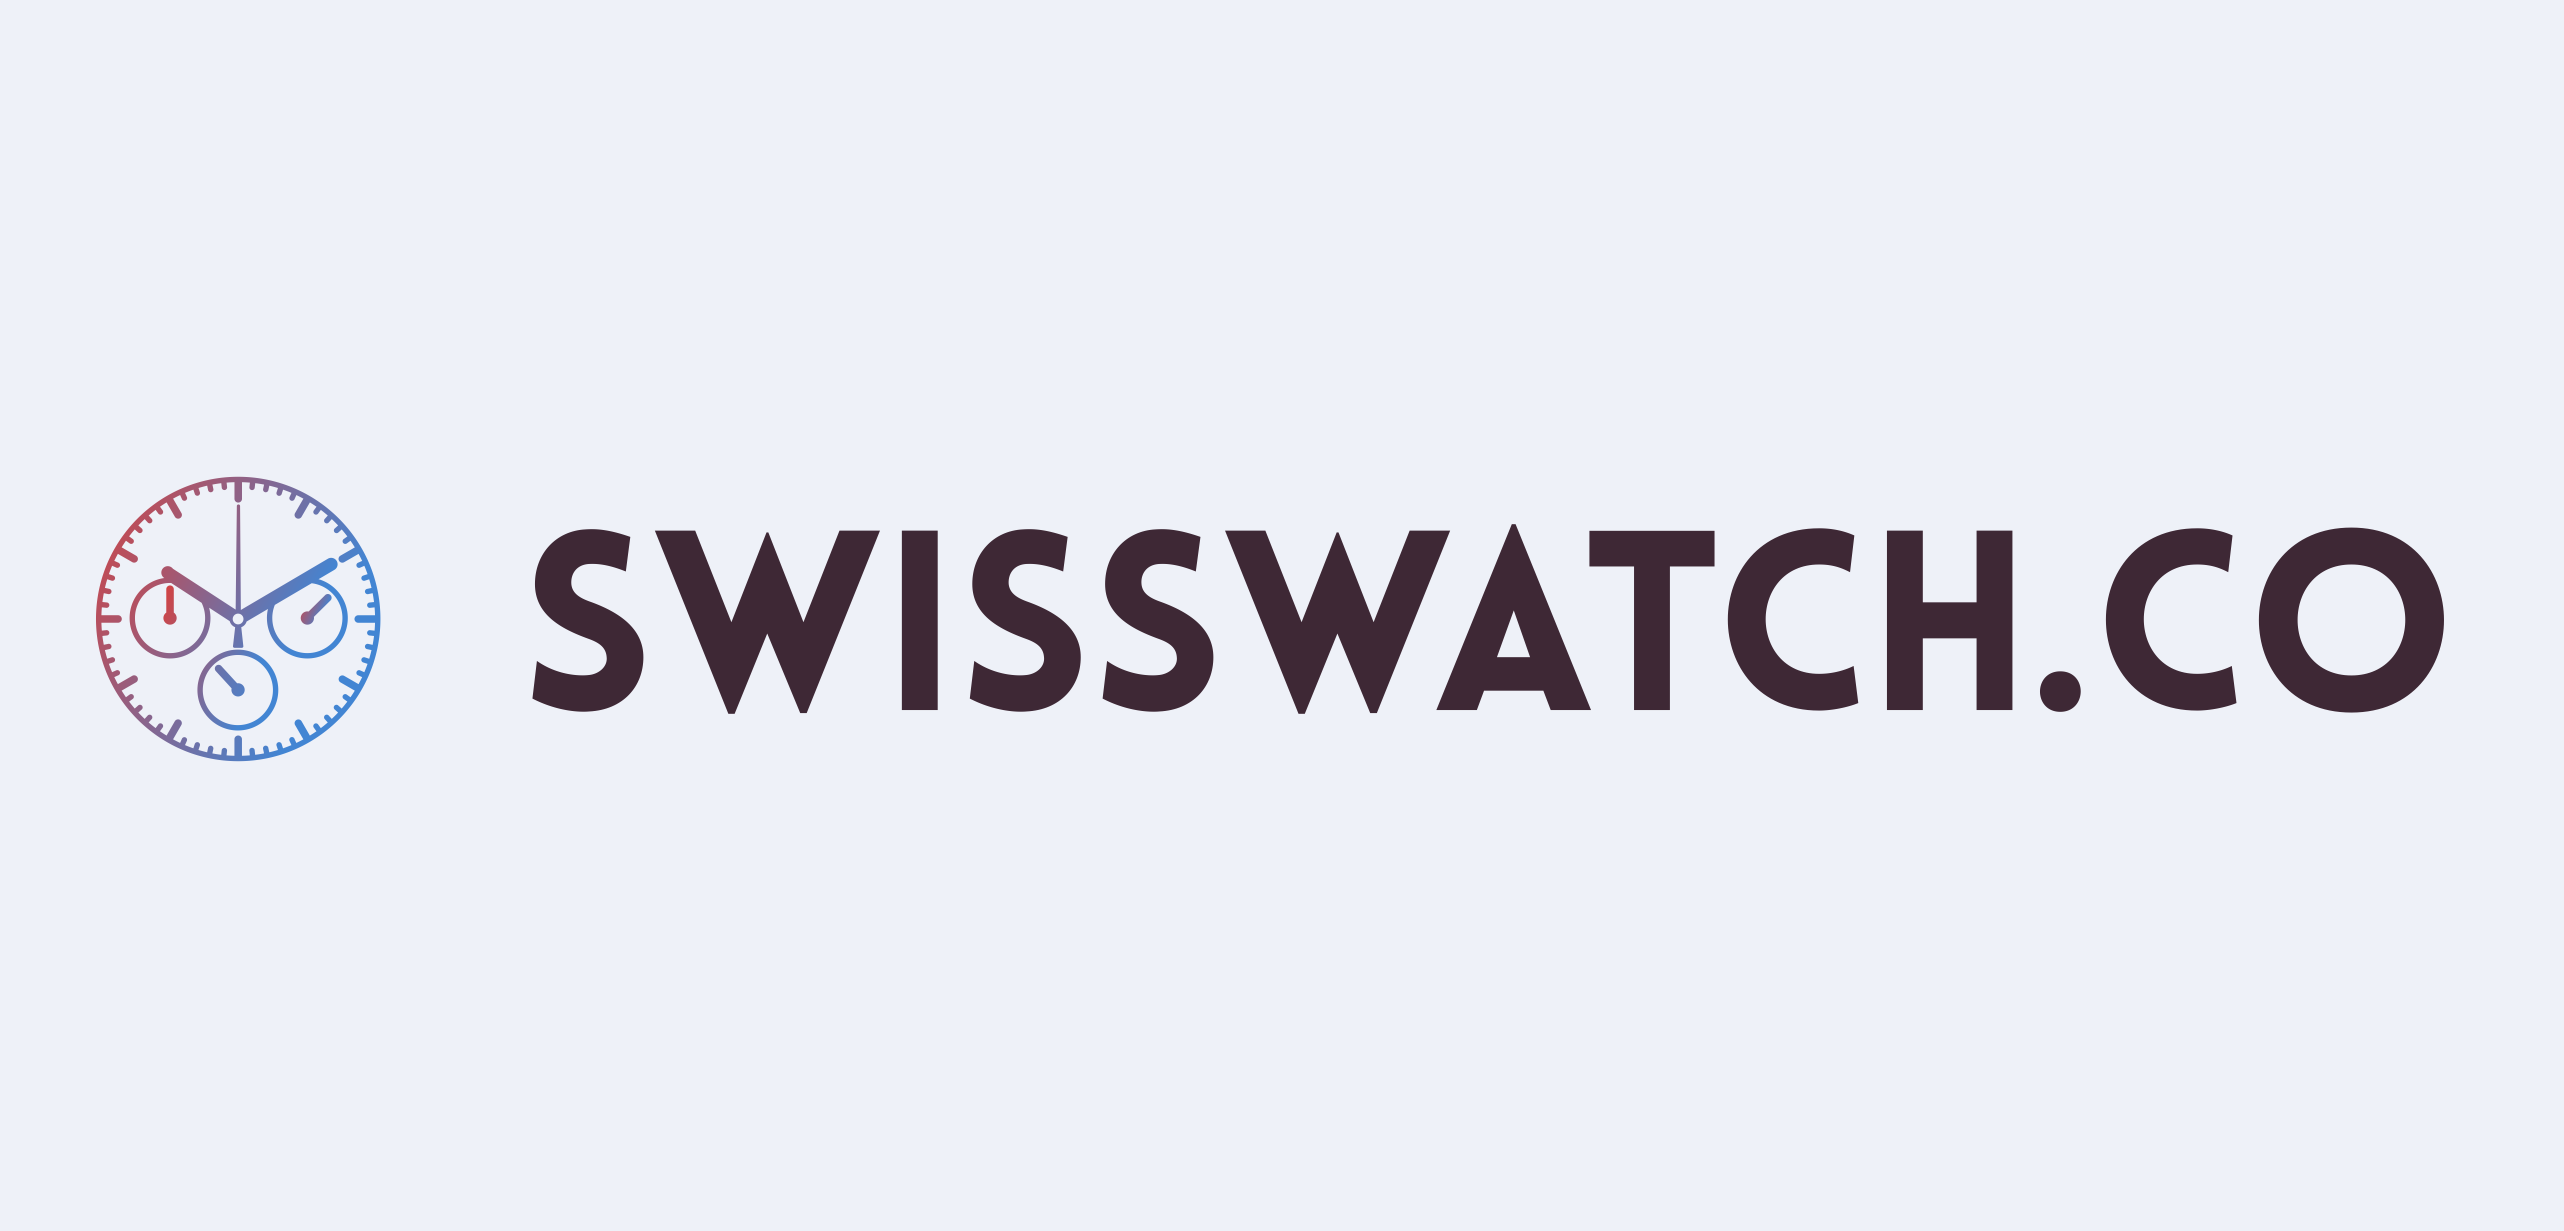 swisswatch.co1.png